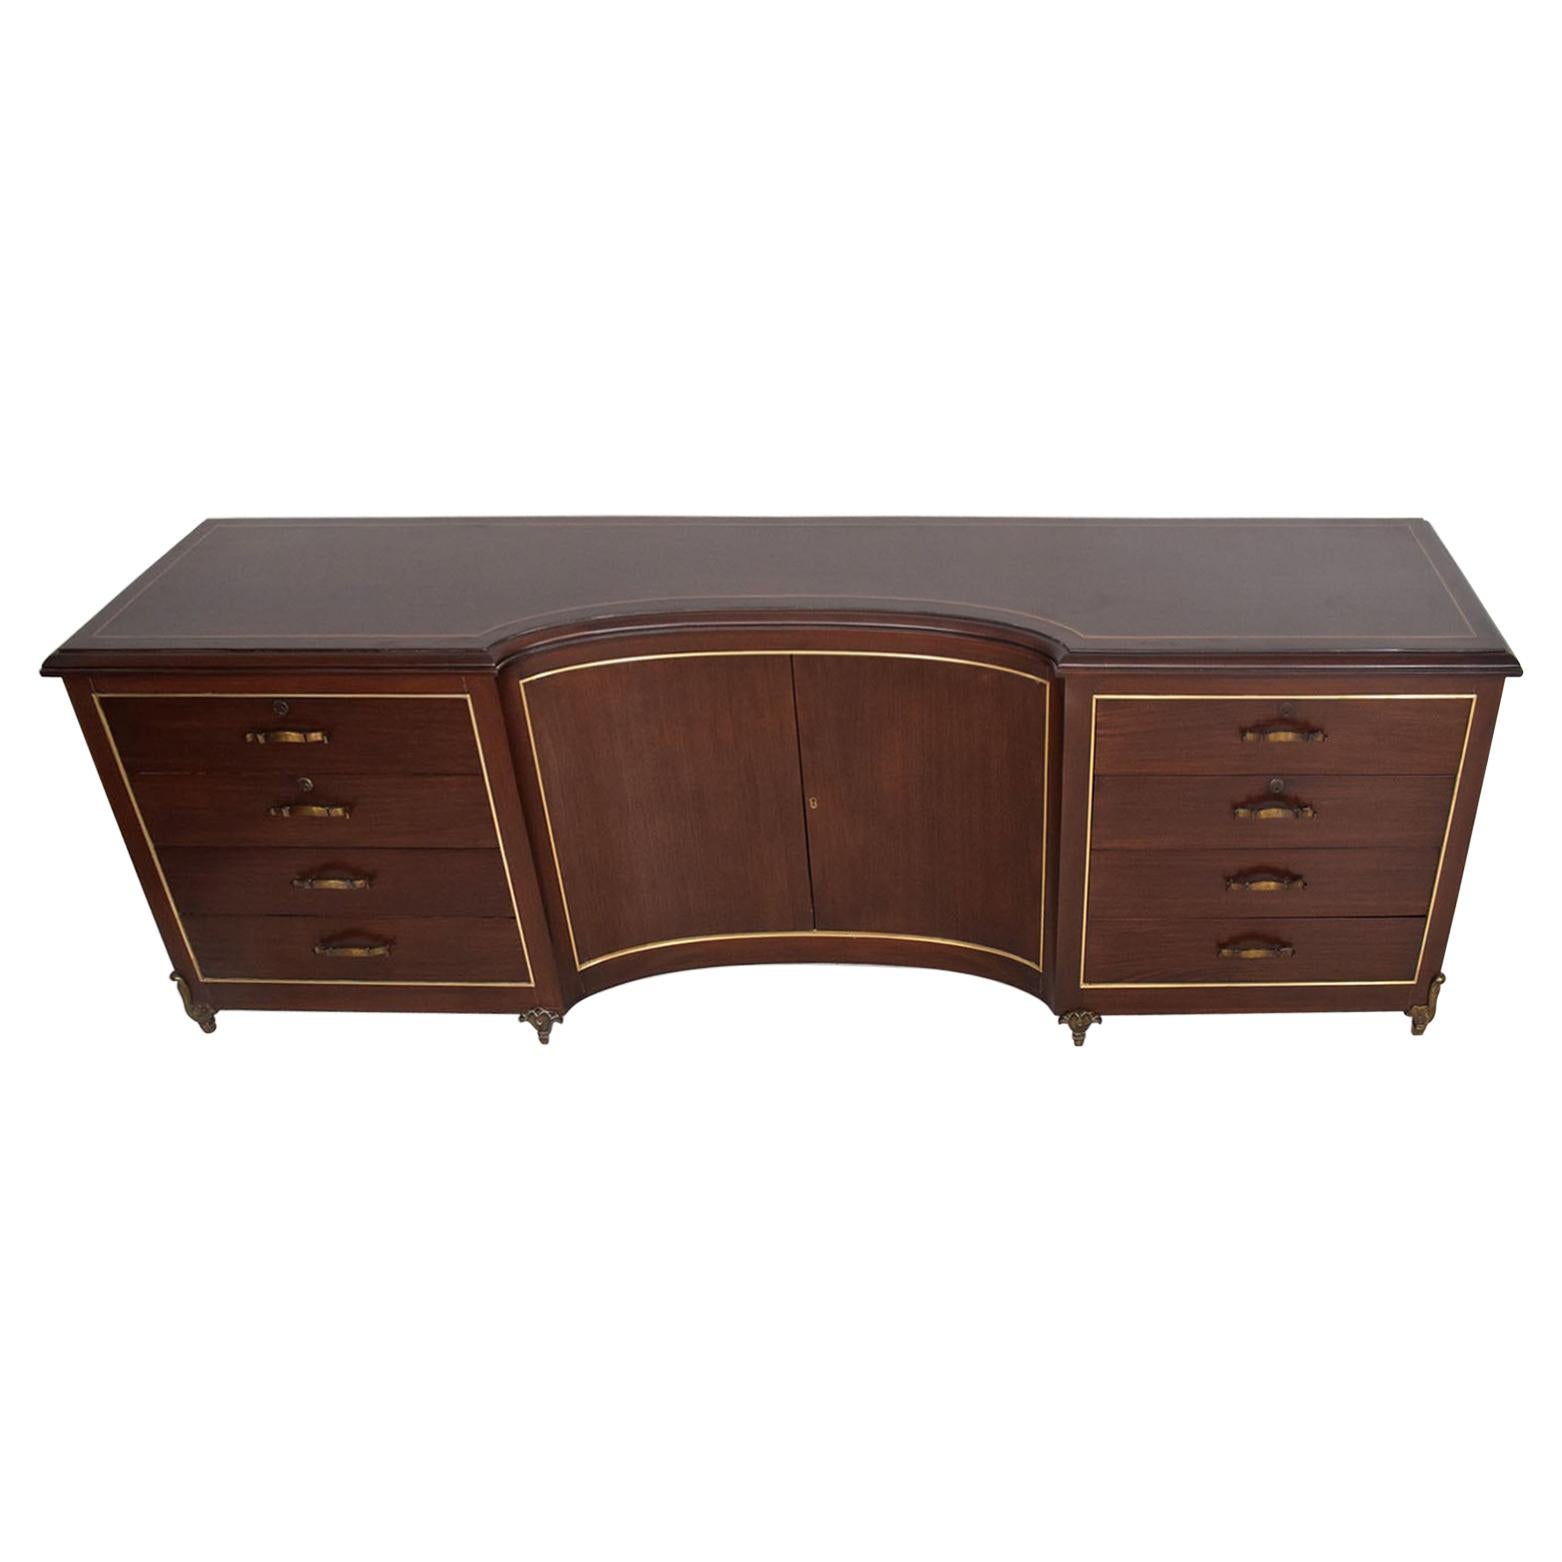 Modern Credenza Dresser Mahogany & Bronze by Arturo Pani Mexico circa 1950s.
No markings or signature from the maker.
Magnificent design curved center angled doors with pull-out drawers at each side.
Drawers constructed with double dove tail